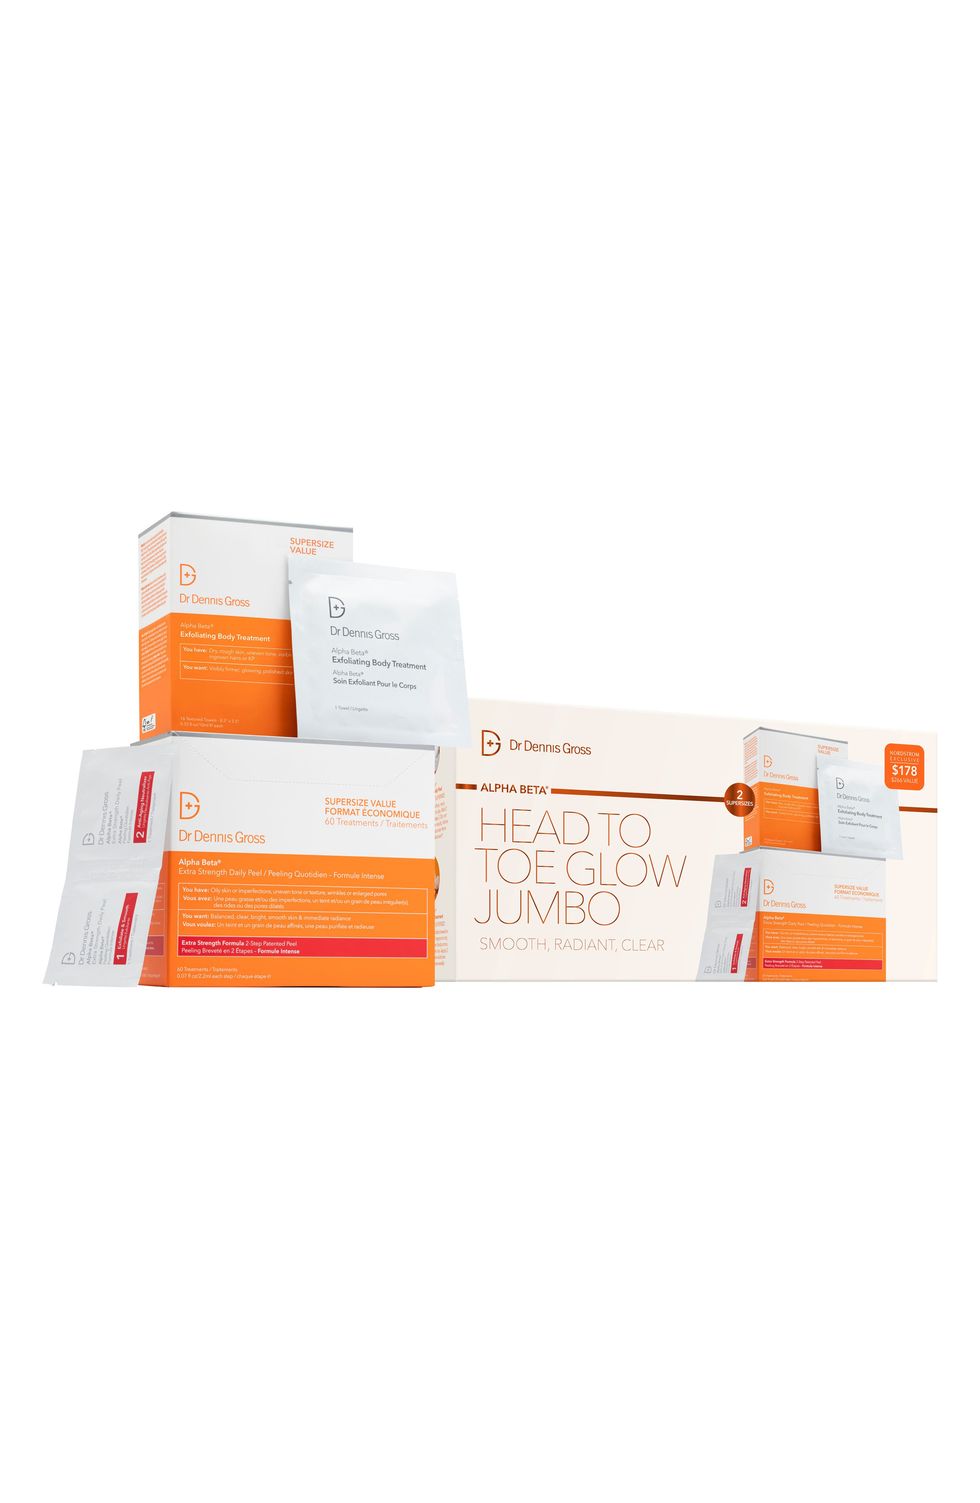 Dr. Dennis Gross Skincare Daily Facial Peel Set-$266 Value (Nordstrom Exclusive)